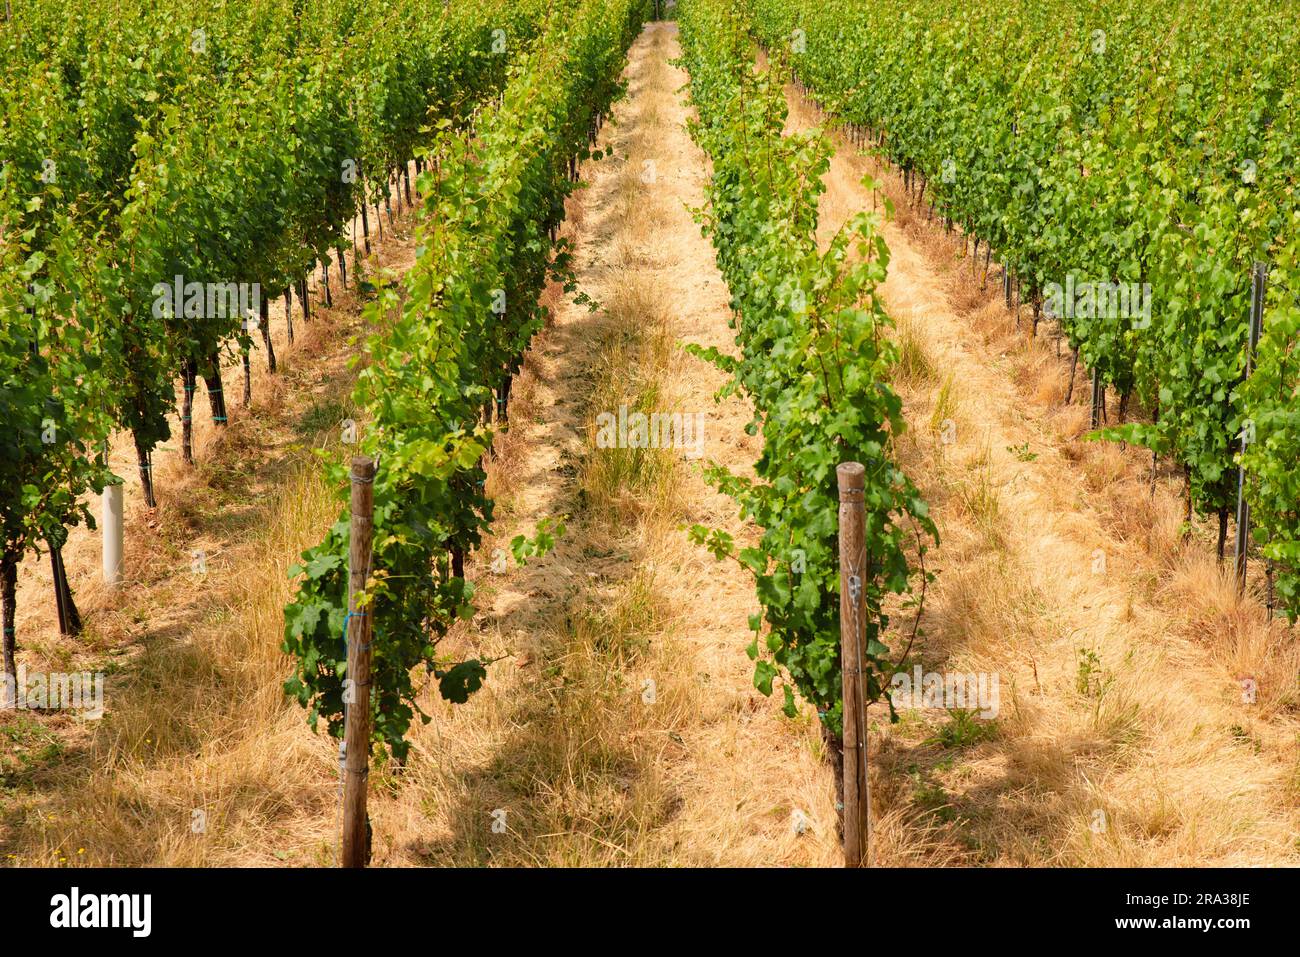 Vineyard in the ancient roman city of Trier, Moselle Valley in Germany, landscape in rhineland palatine Stock Photo